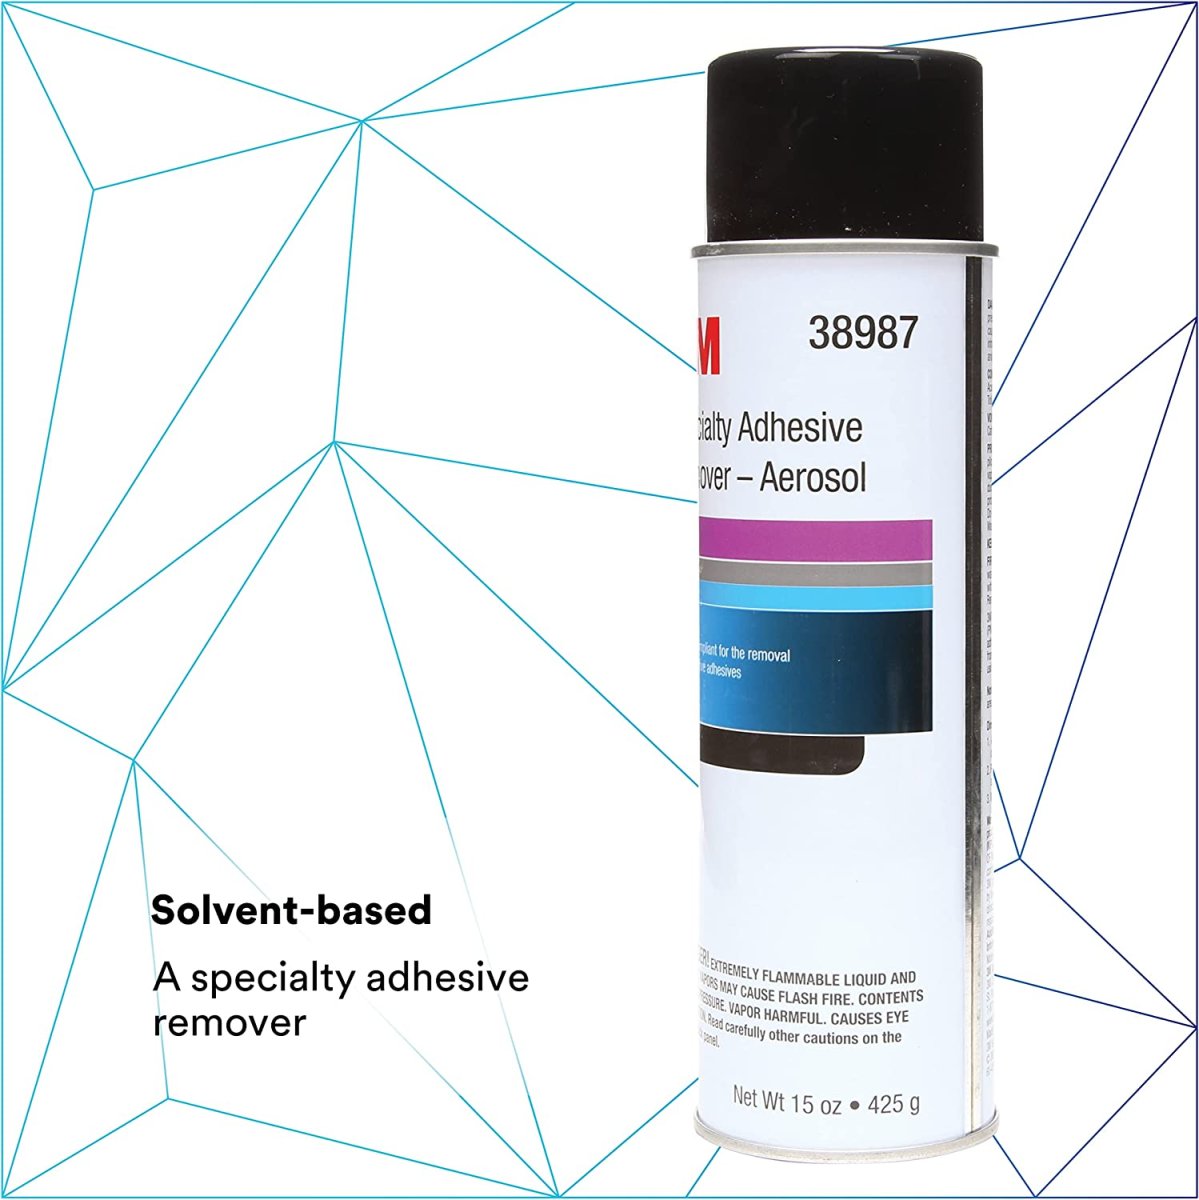 DealerShop - 3M Specialty Adhesive Remover 15oz - 38987 - Adhesive Removers